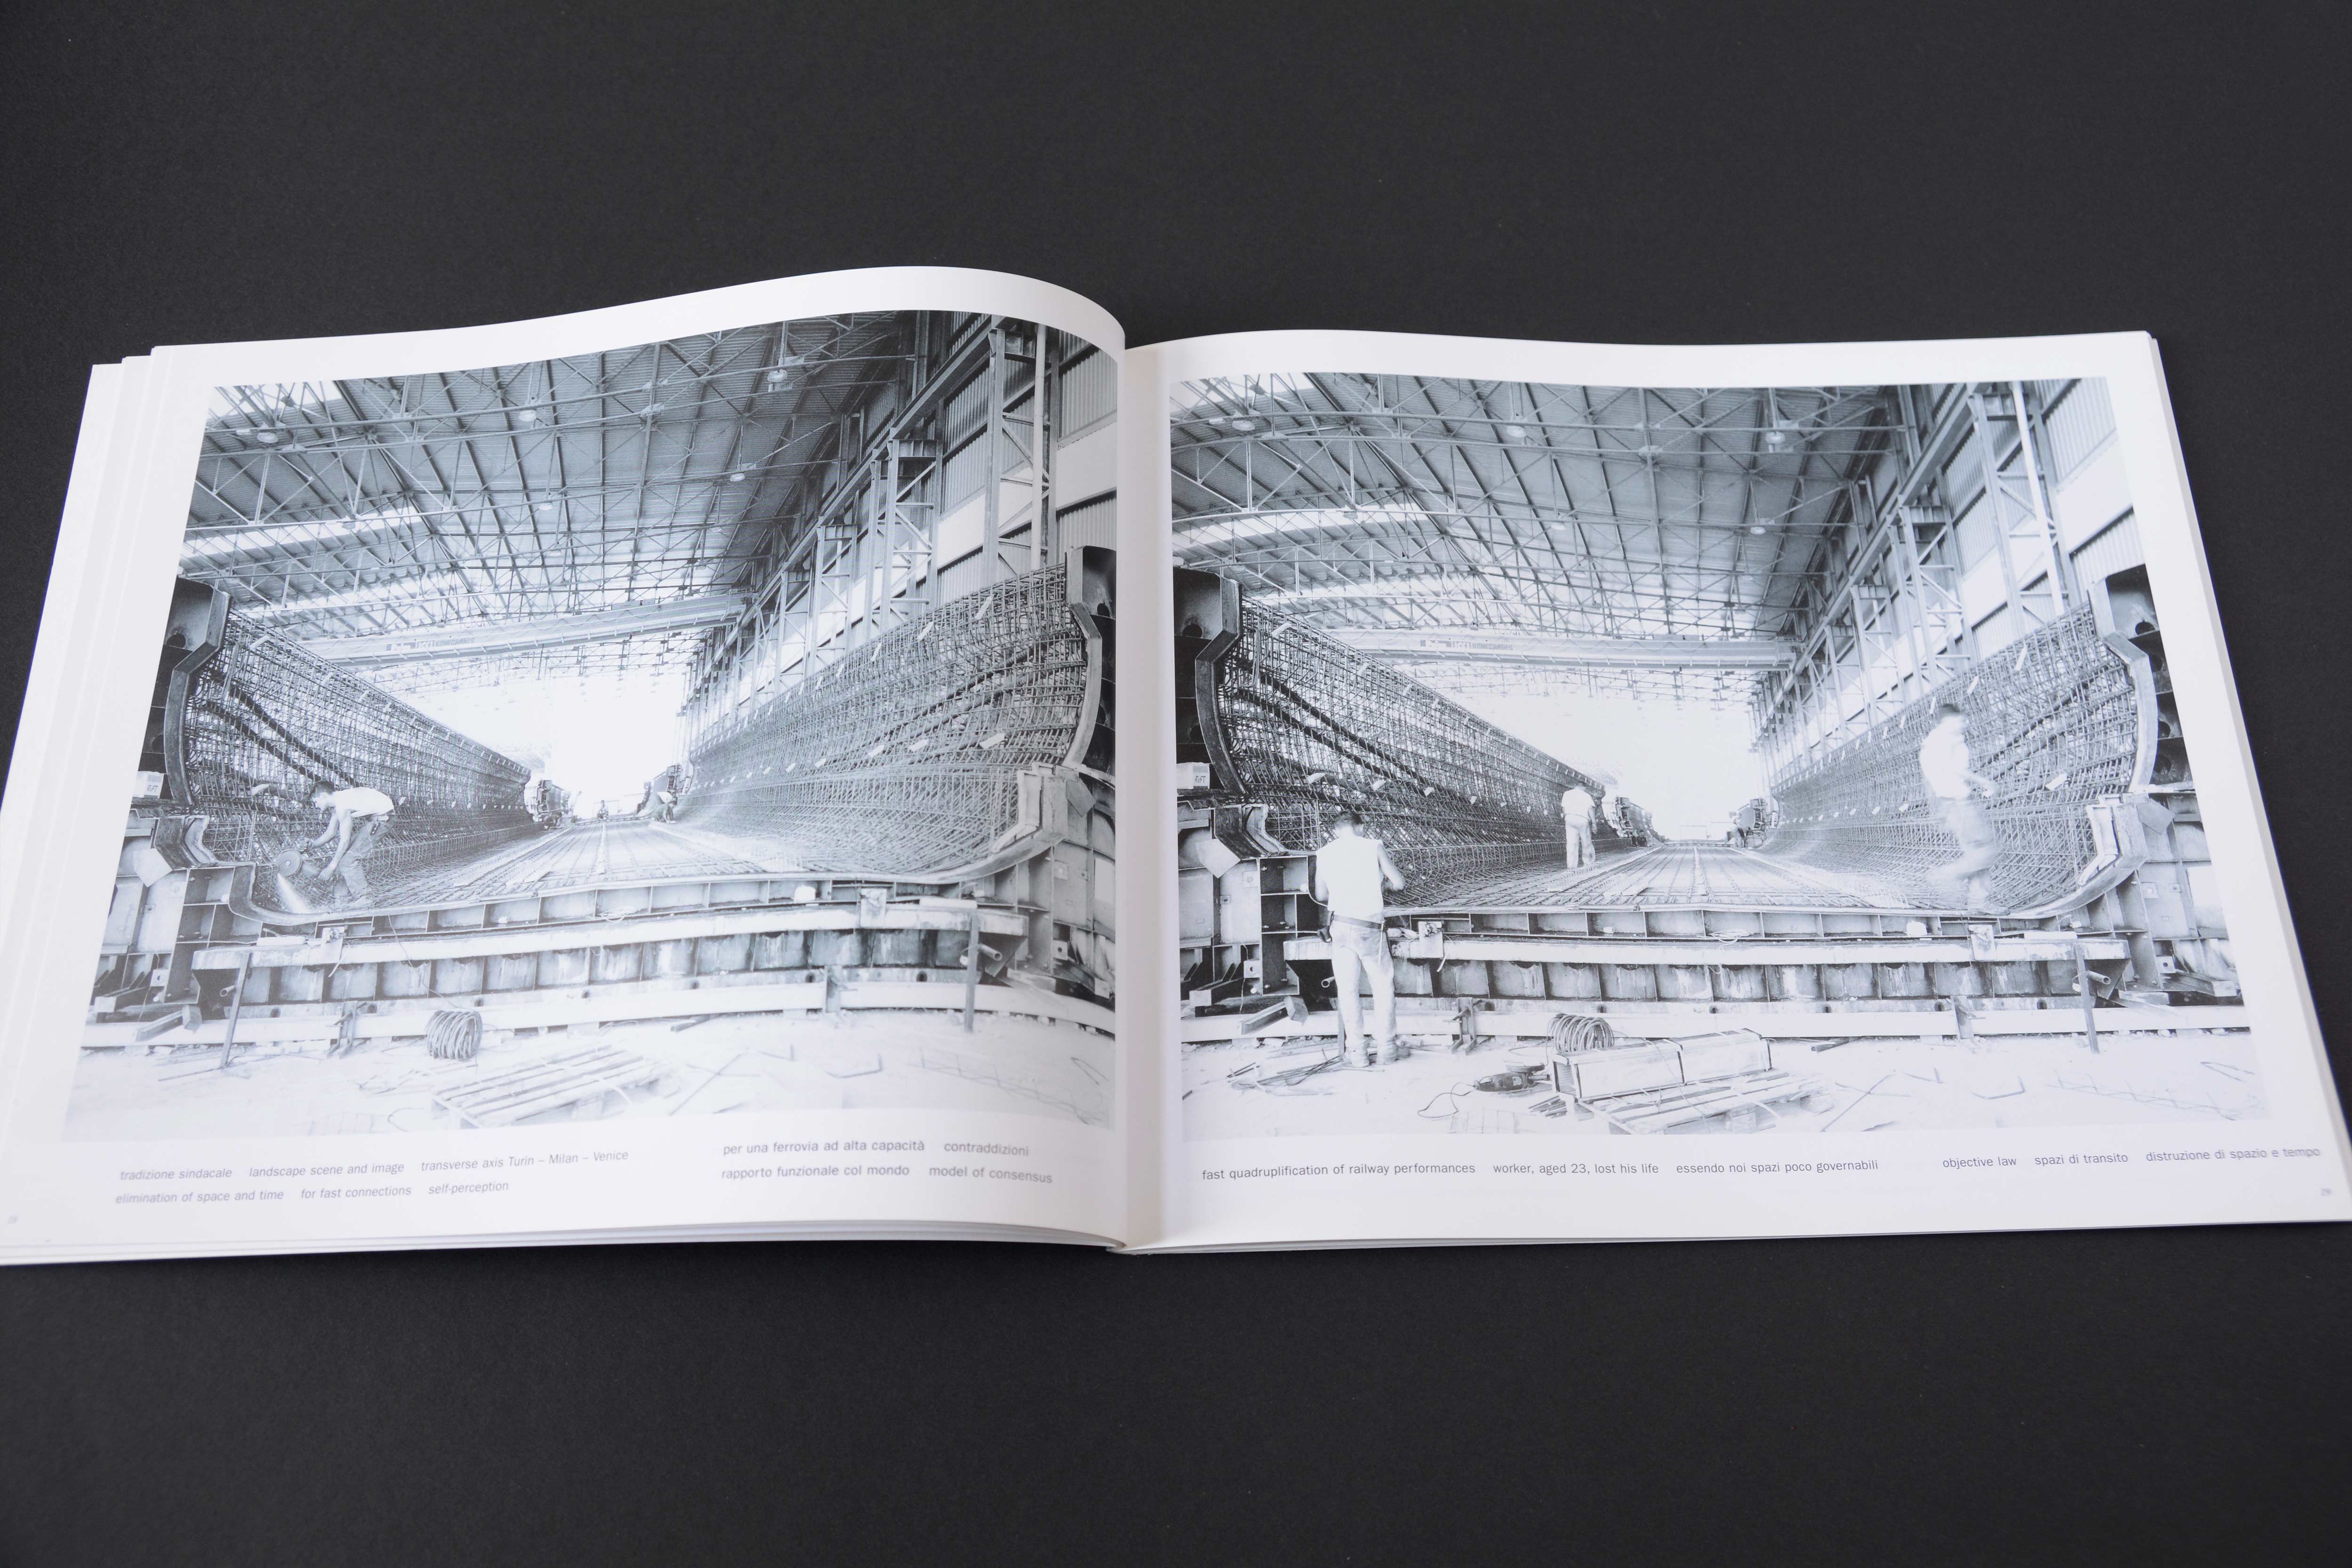 Double page. Large b/w photo with white space around on each page. View into skeleton of bridge in contruction. Workers around. Lines of small text at bottom.